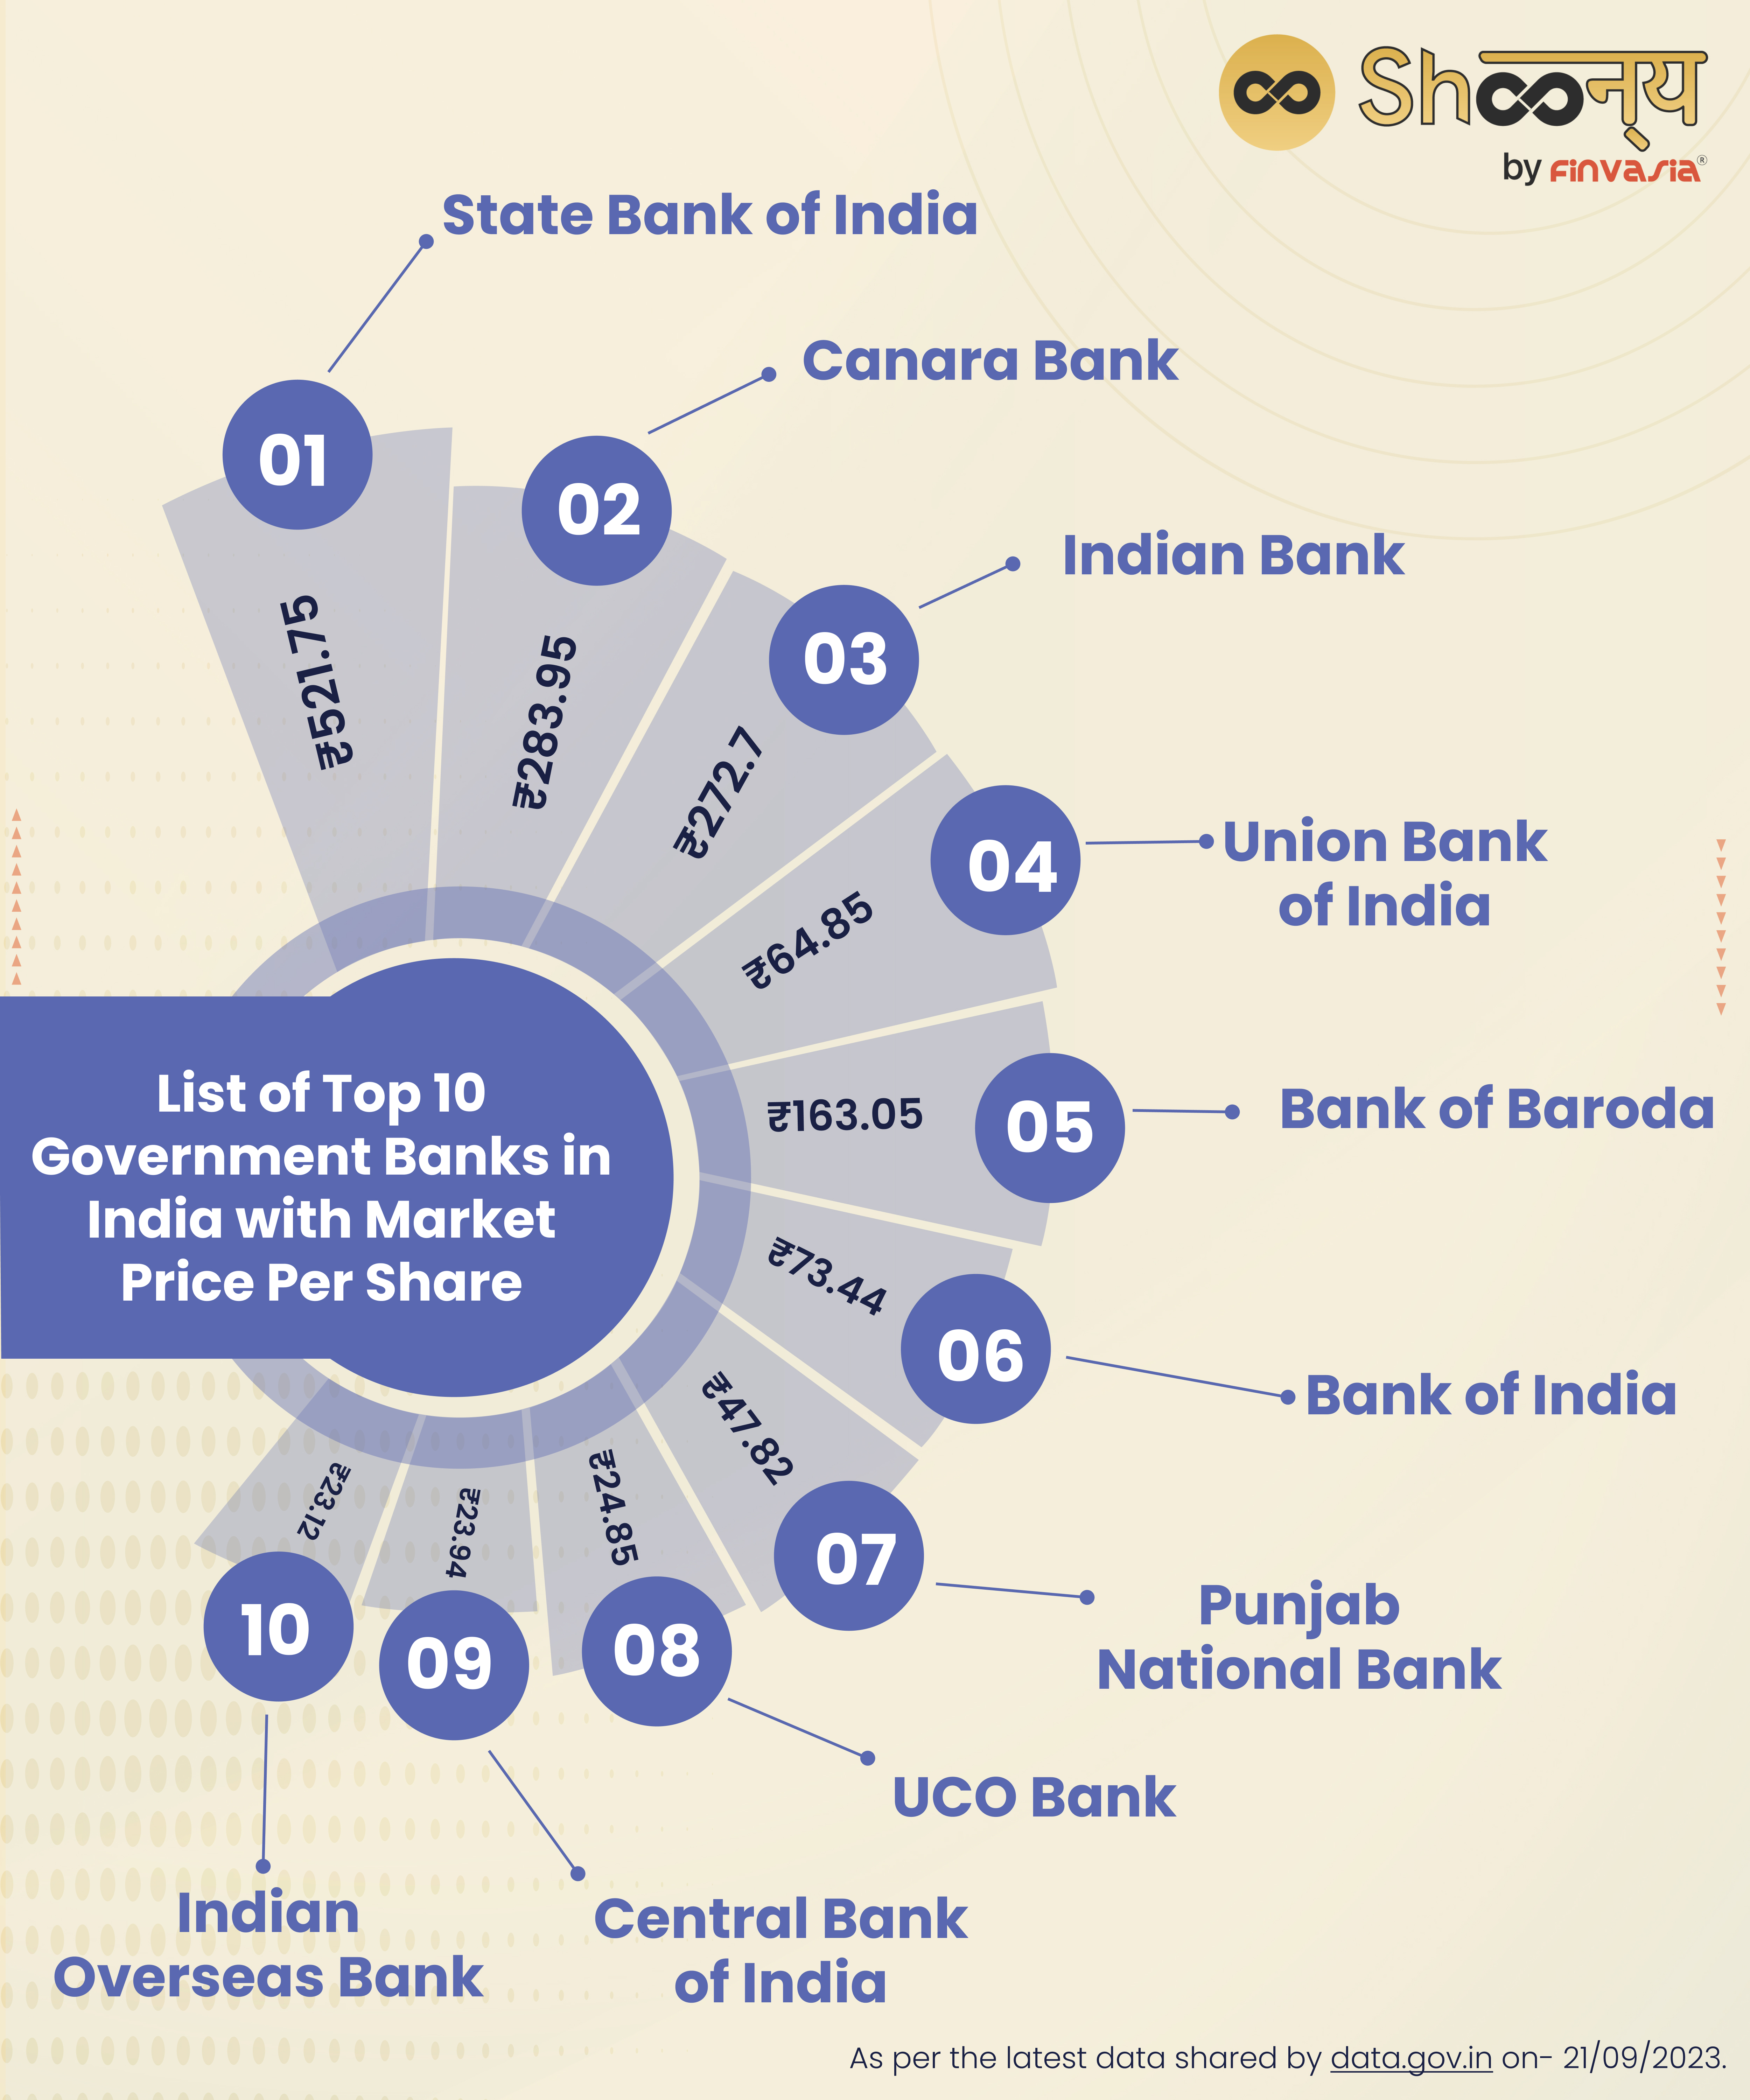 List of Top 10 Government Banks in India
